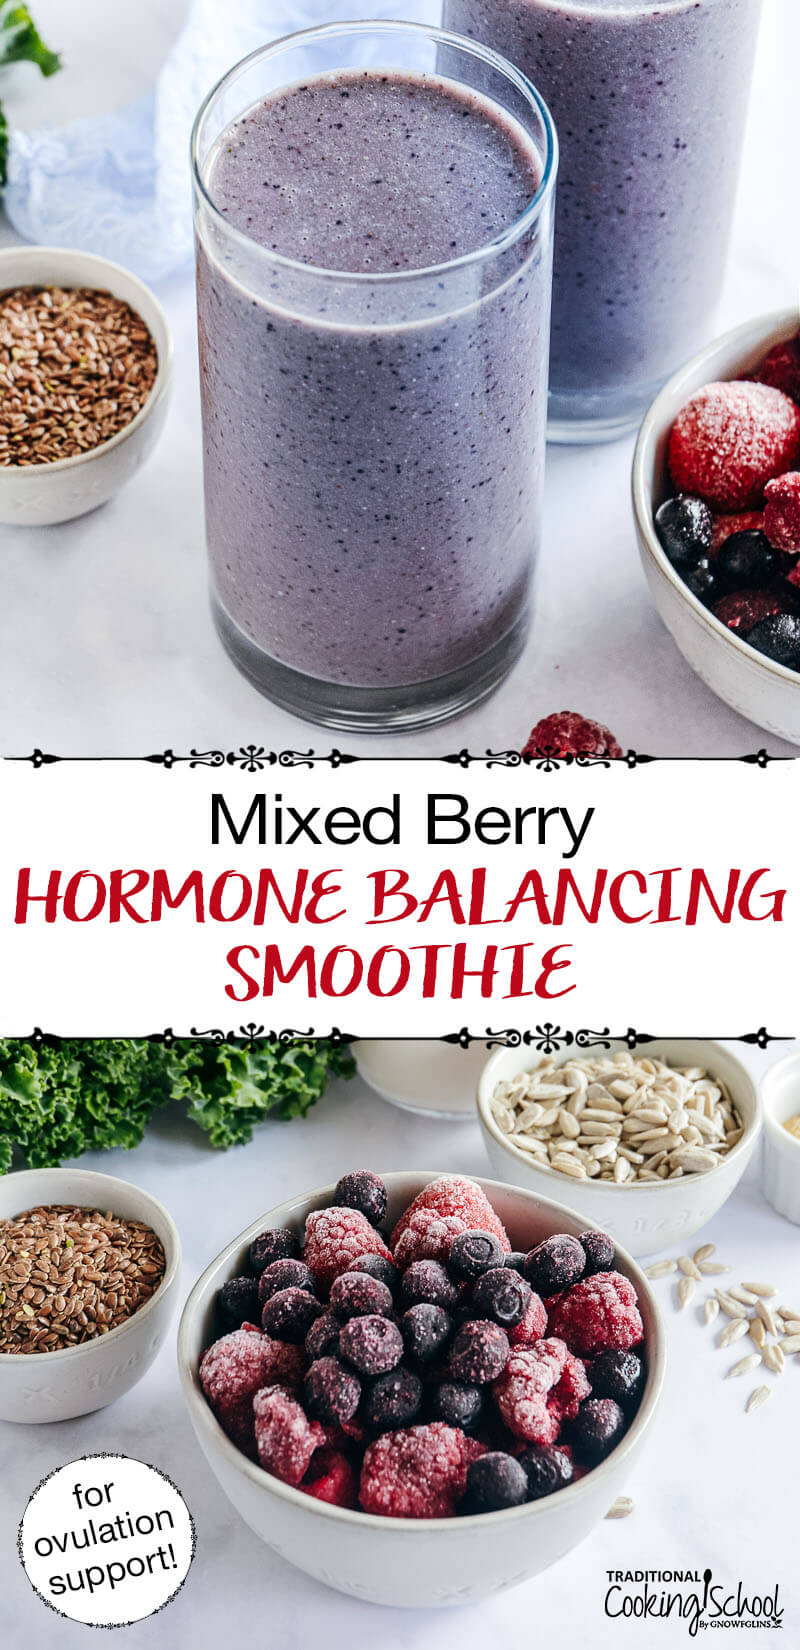 photo collage of purple-colored smoothie with array of ingredients, including frozen berries and seeds, with text overlay: "Mixed Berry Hormone Balancing Smoothie (for ovulation support!)"